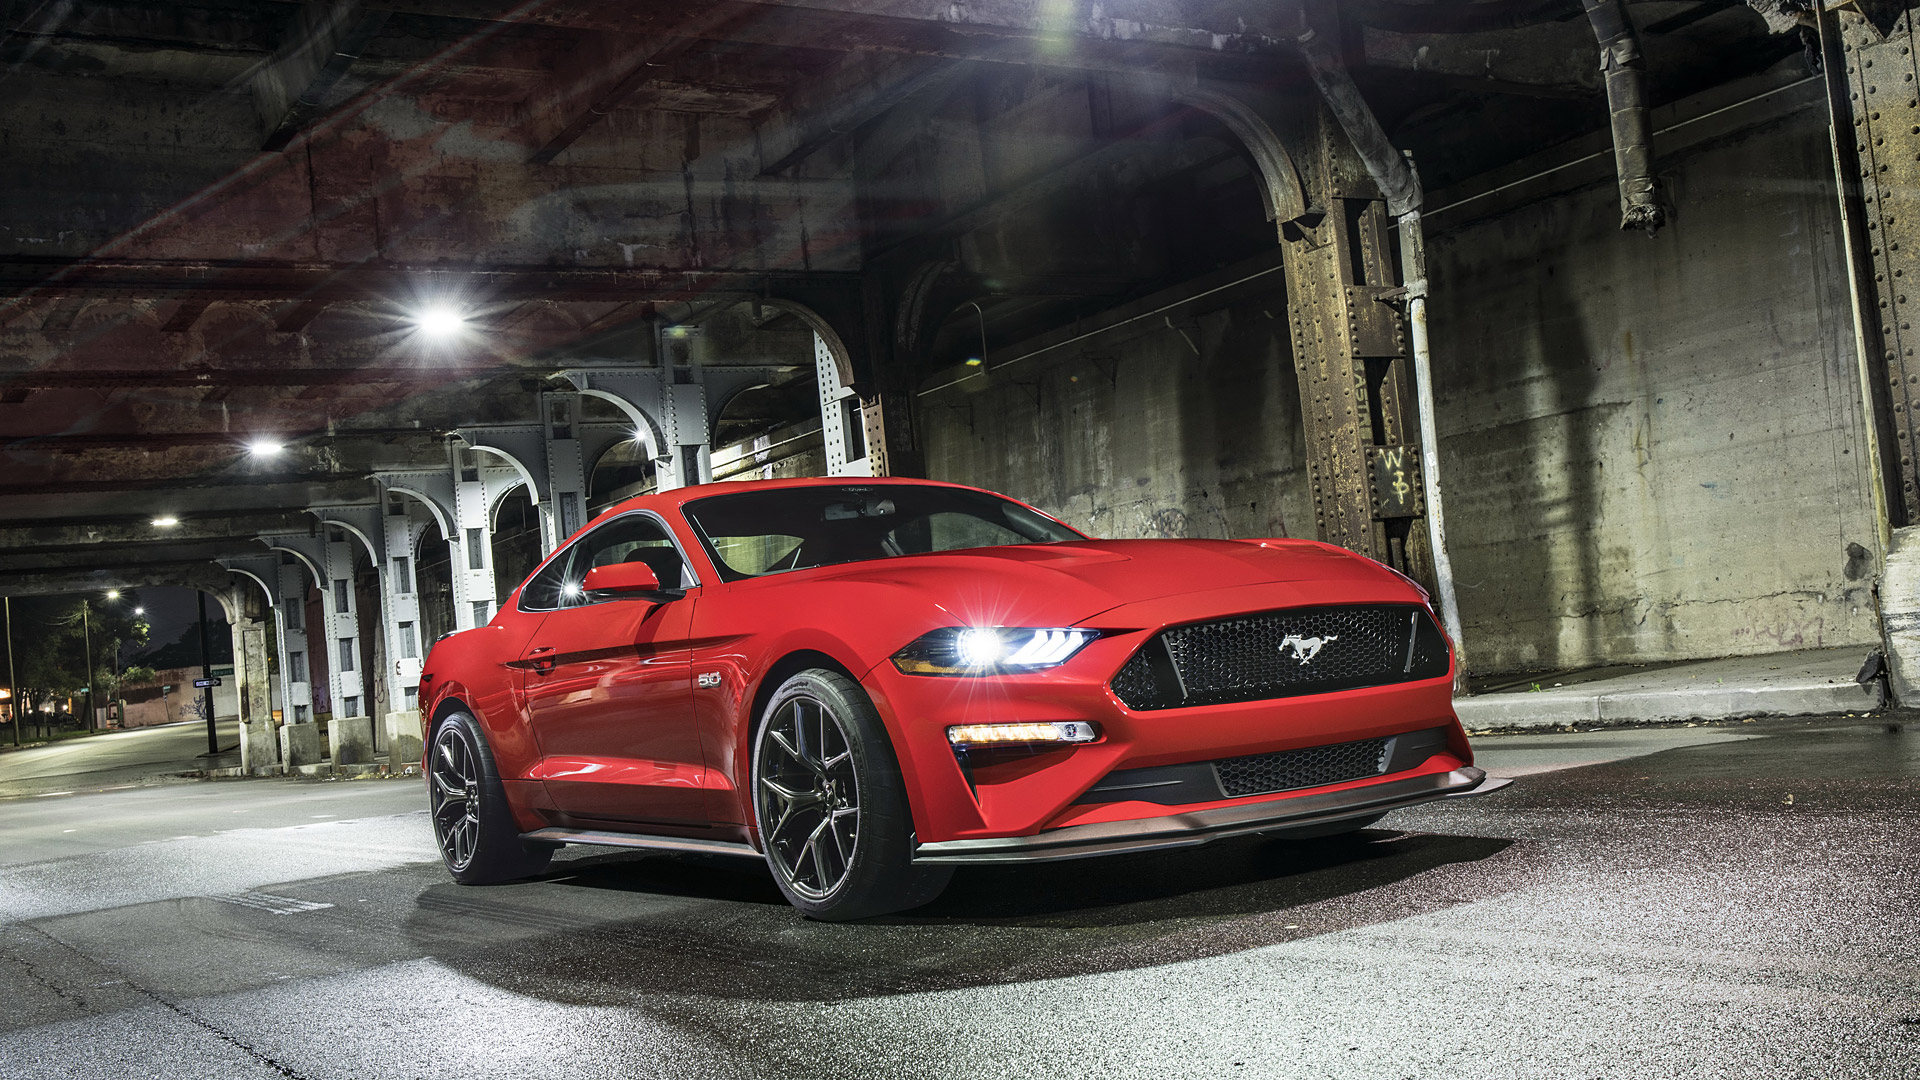 Ford Mustang Gt Muscle Car Red Car 1920x1080